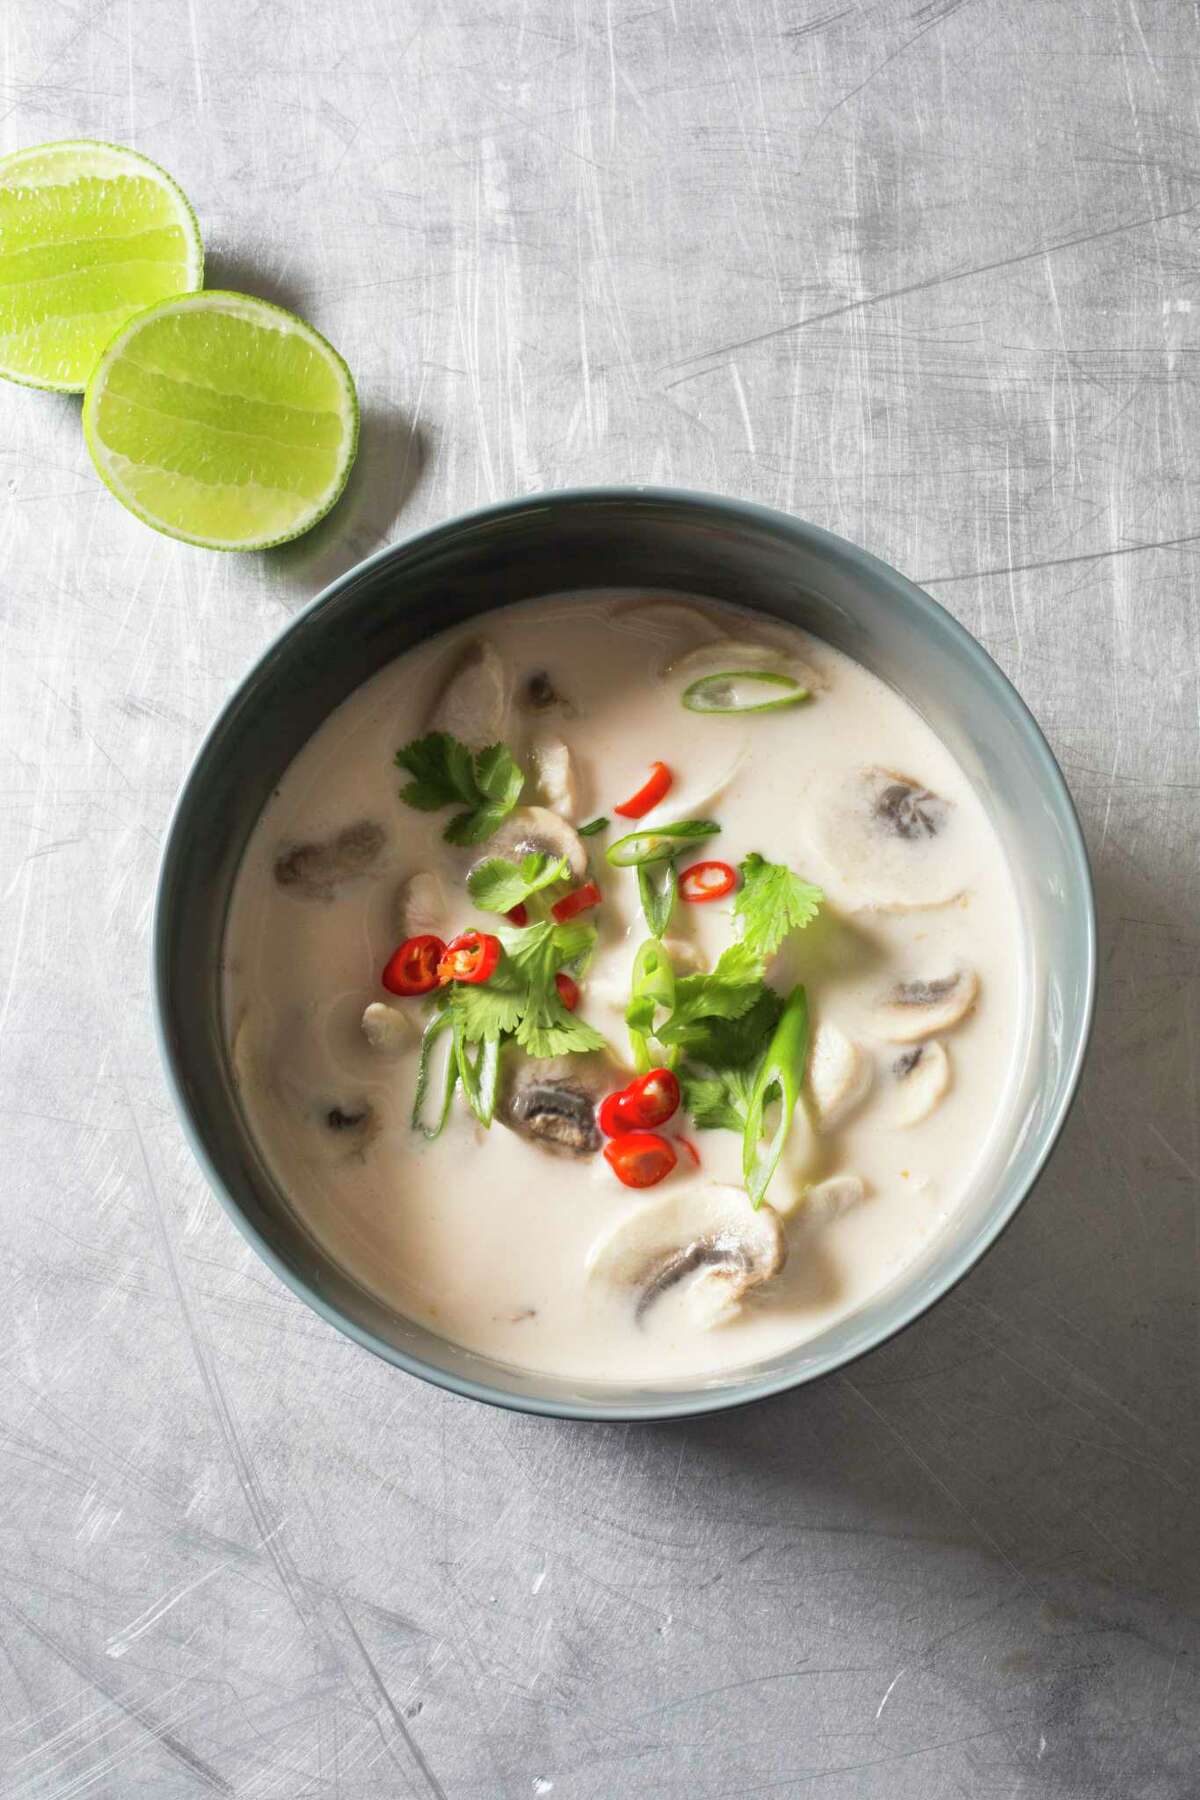 Thai-Style Chicken Soup: With this recipe in your arsenal, you can enjoy the addictive flavors of Thai soup any time, not just when dining out.